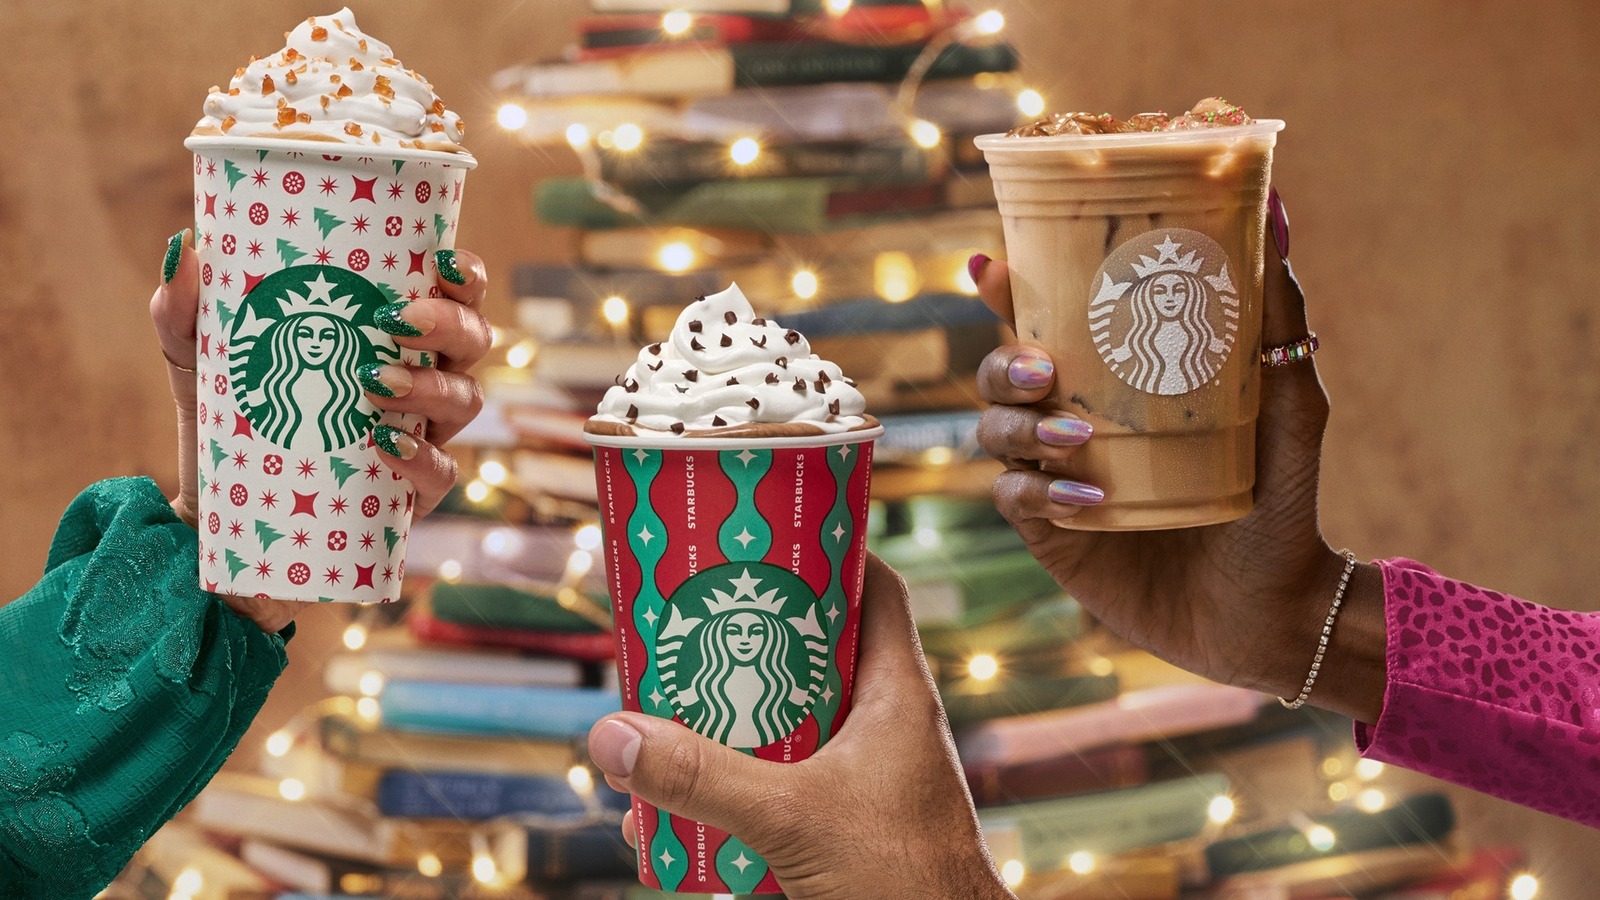 https://www.thedailymeal.com/img/gallery/starbucks-2023-winter-menu-has-apparently-been-leaked/l-intro-1695660406.jpg